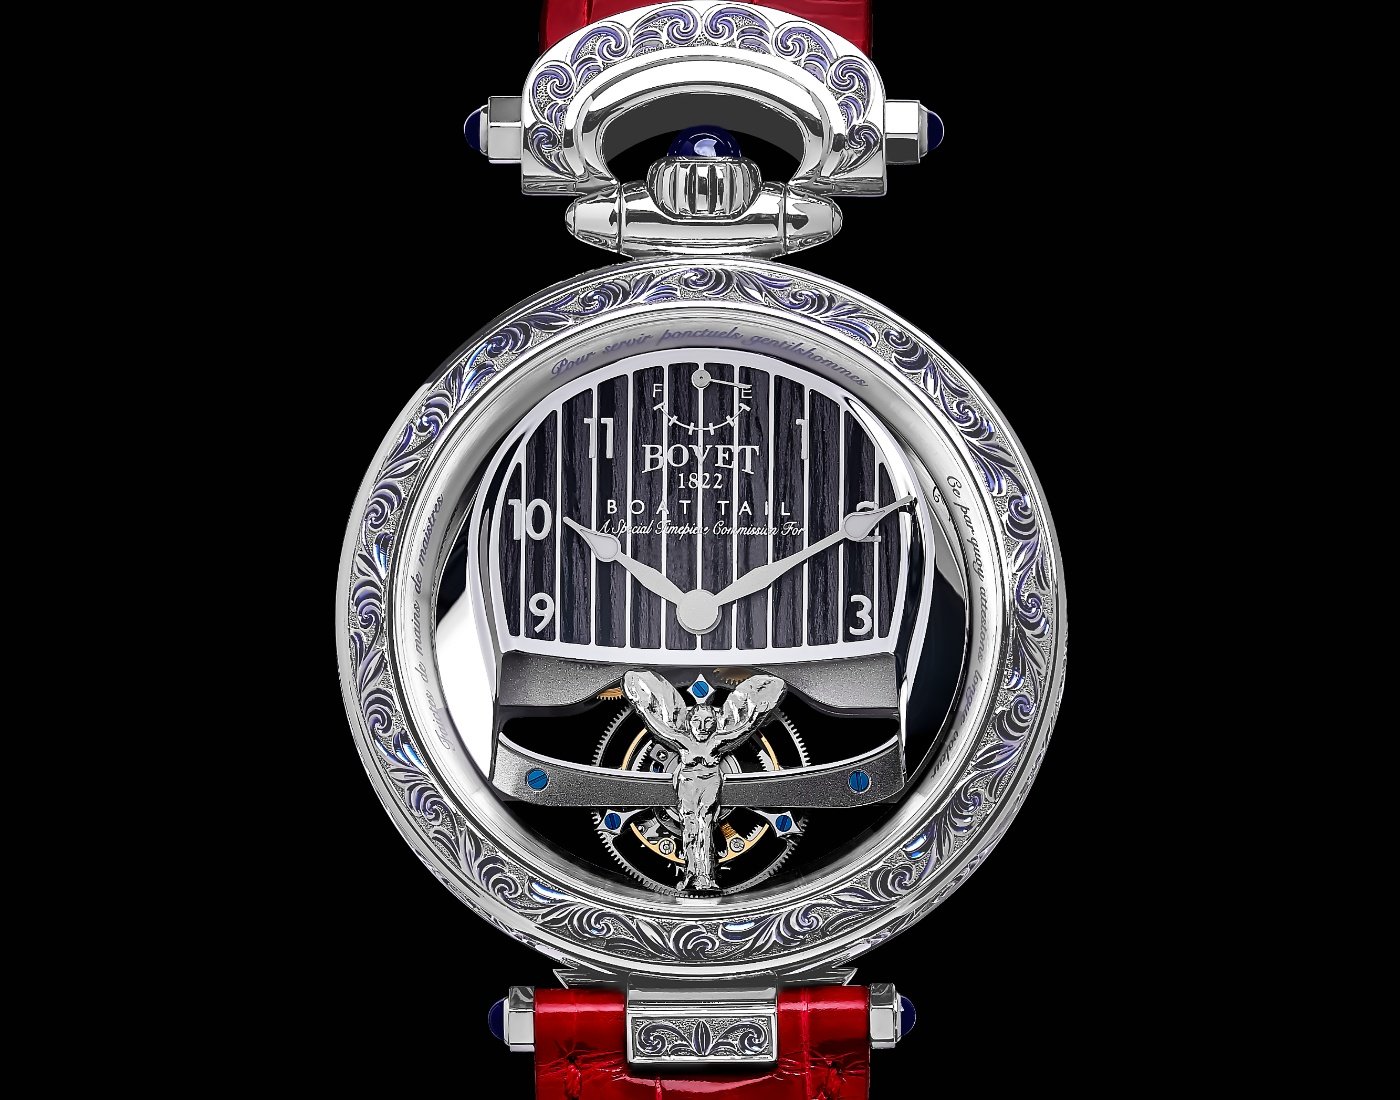 Bovet presents a bespoke project with Rolls-Royce